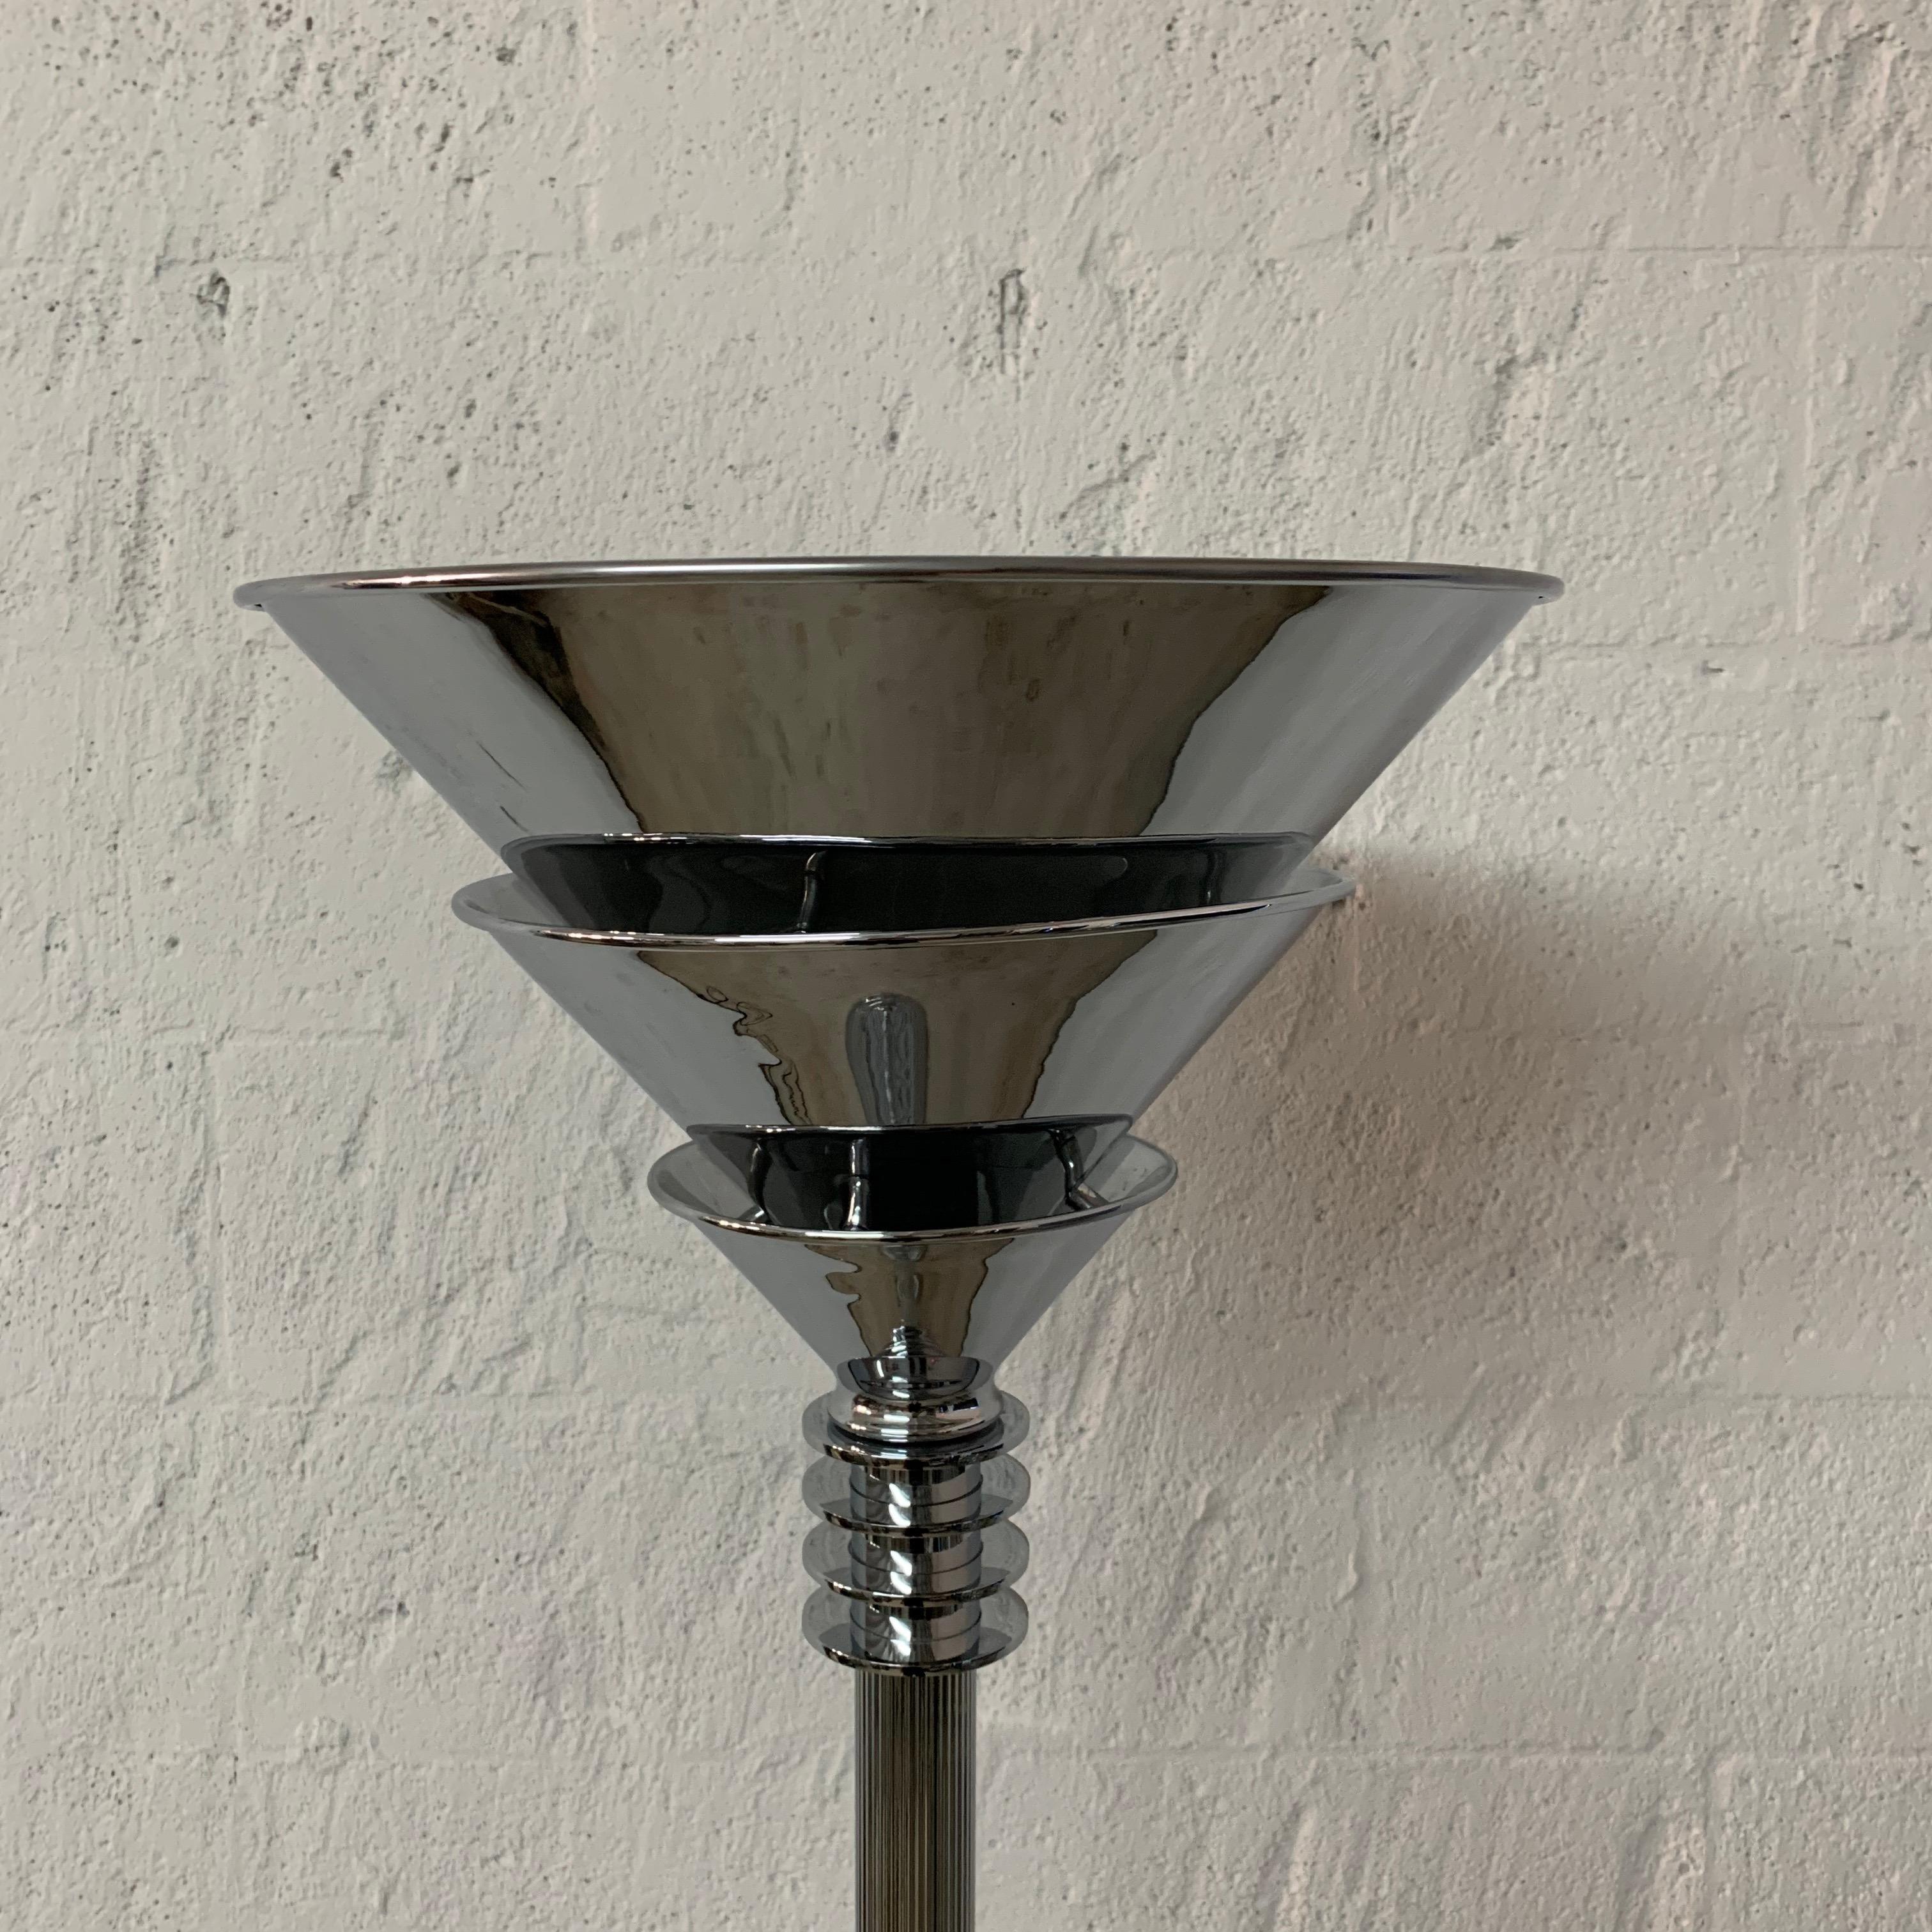 20th Century Art Deco Polished Chrome over Steel Torchiere or Floor Lamp, Jean Perzel Style